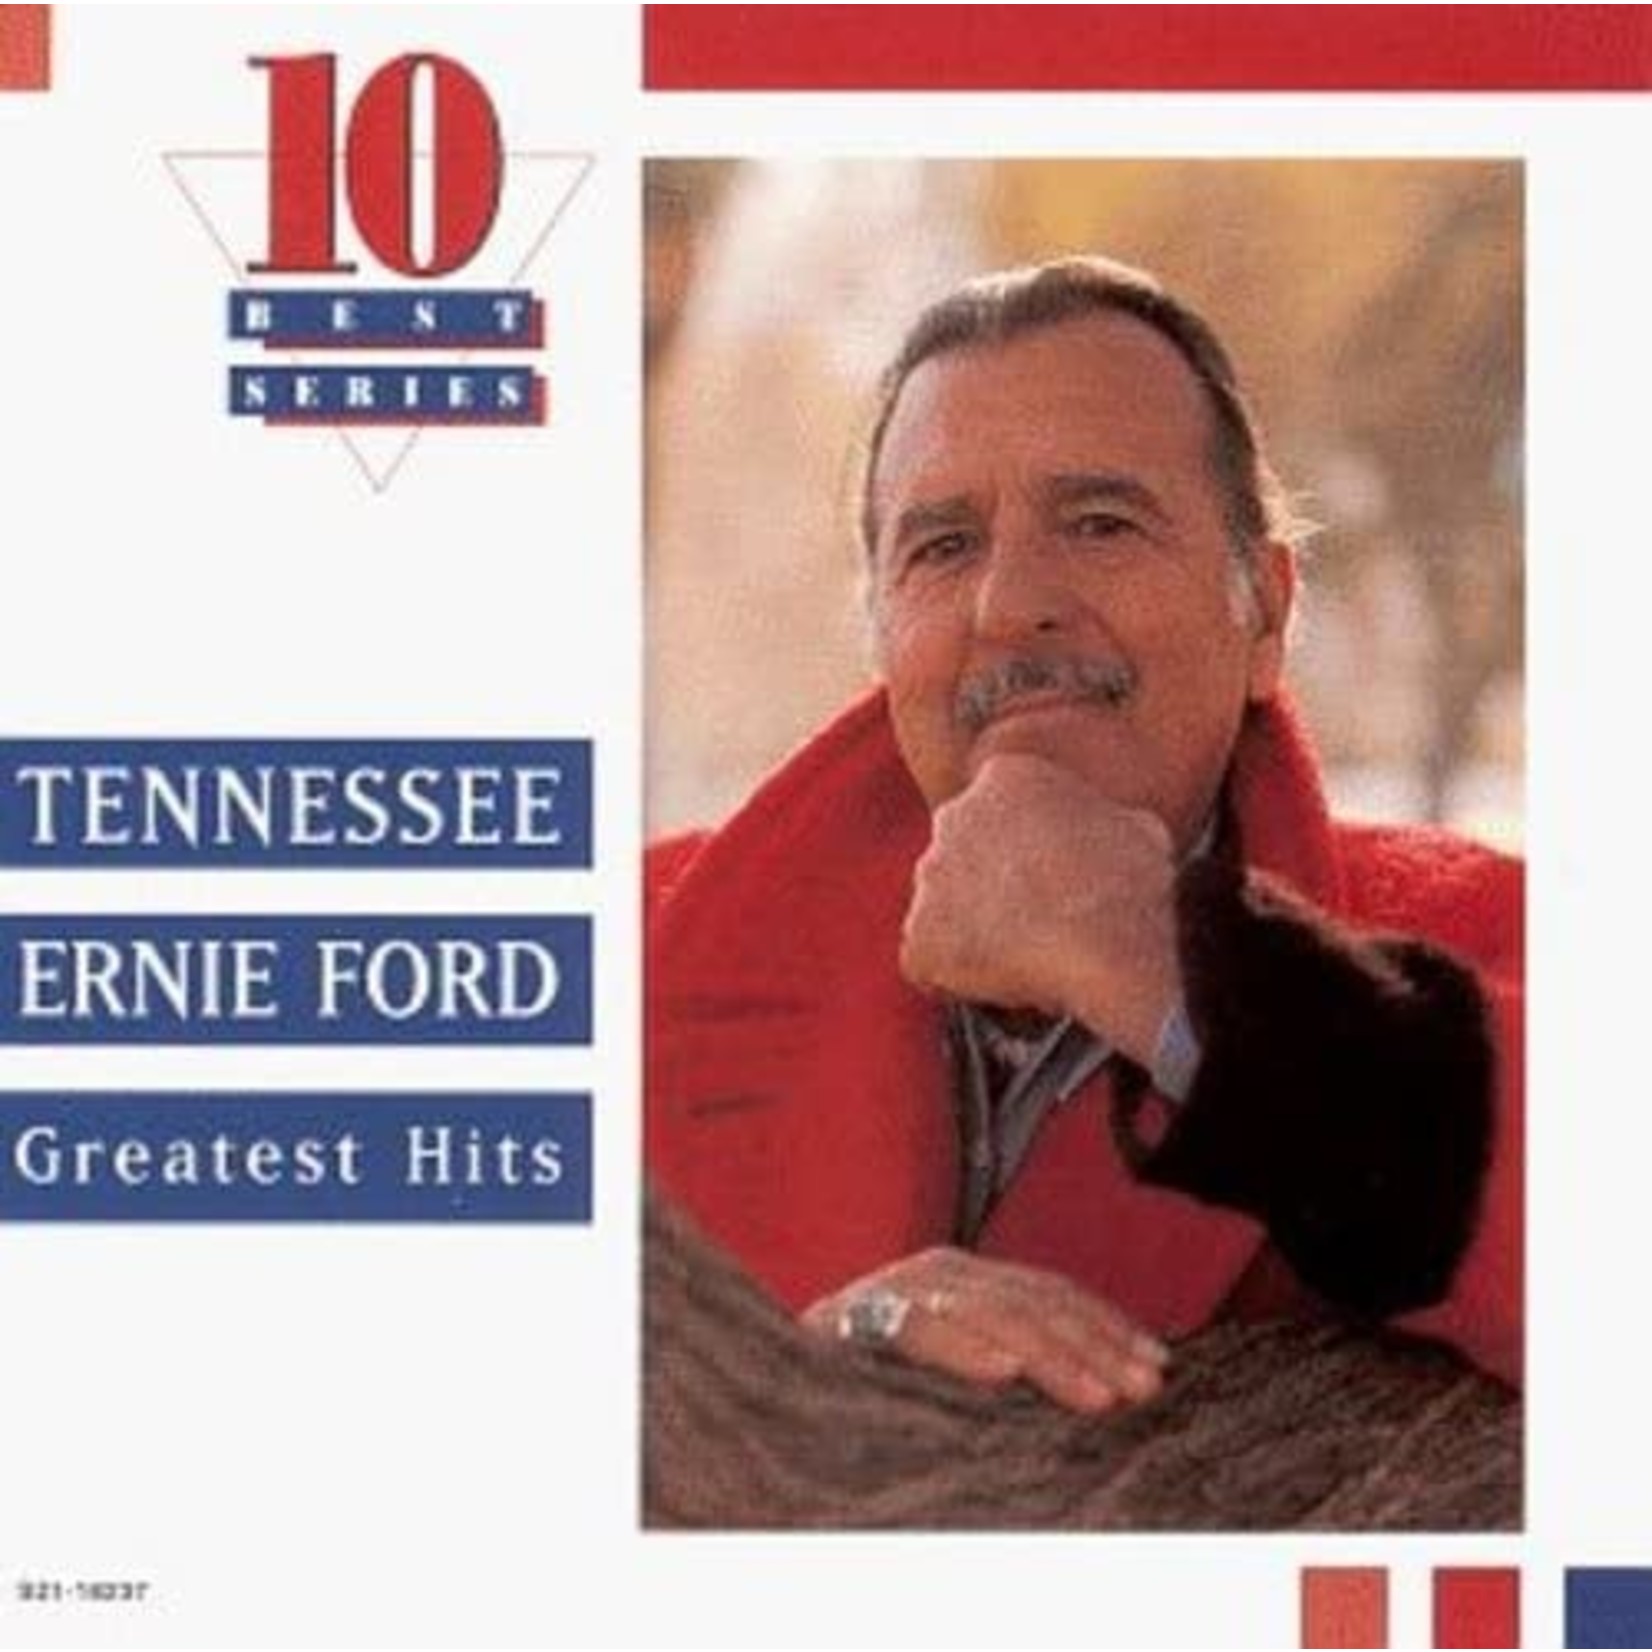 Tennessee Ernie Ford - Greatest Hits [USED CD]